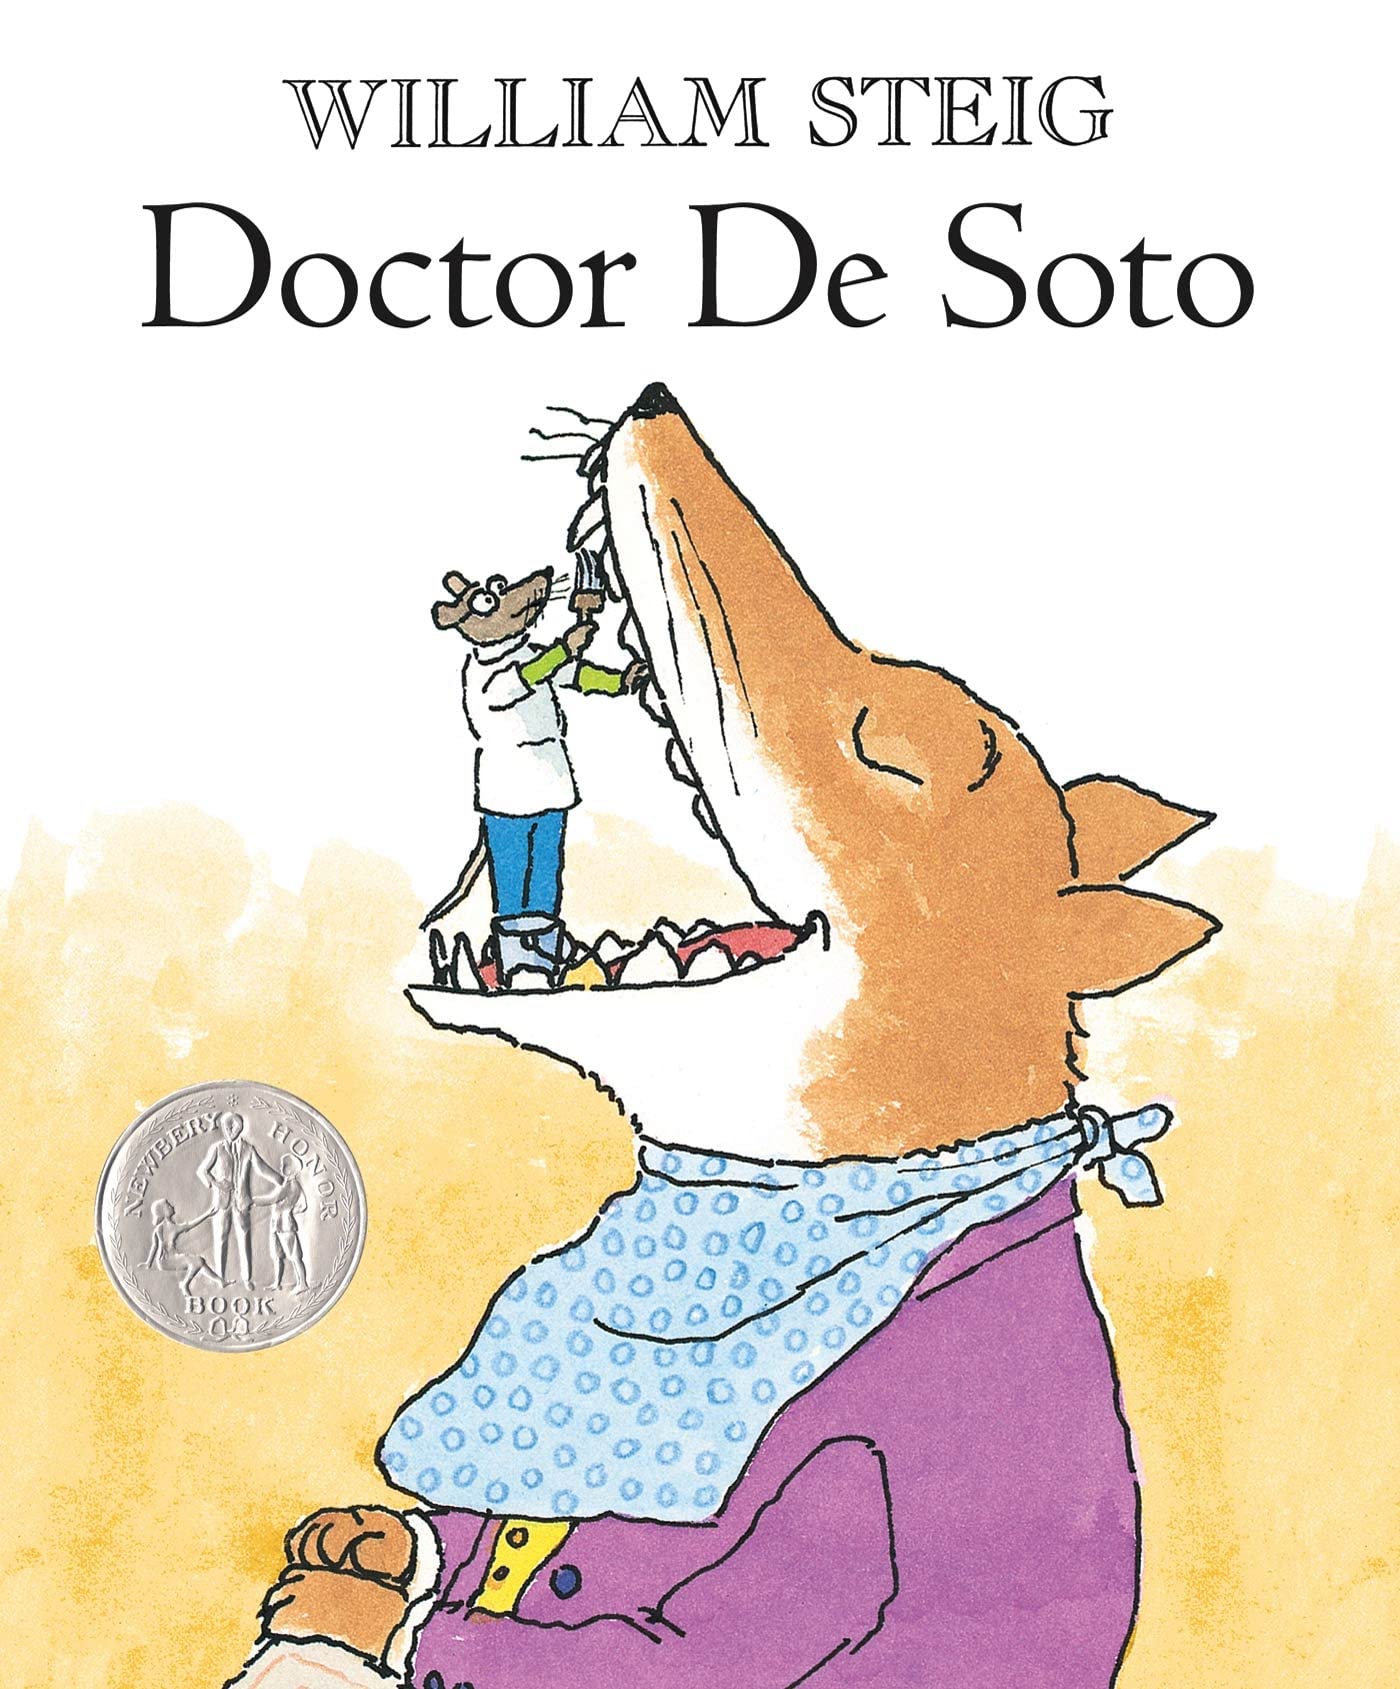 speech and language teaching concepts for Doctor De Soto in speech therapy